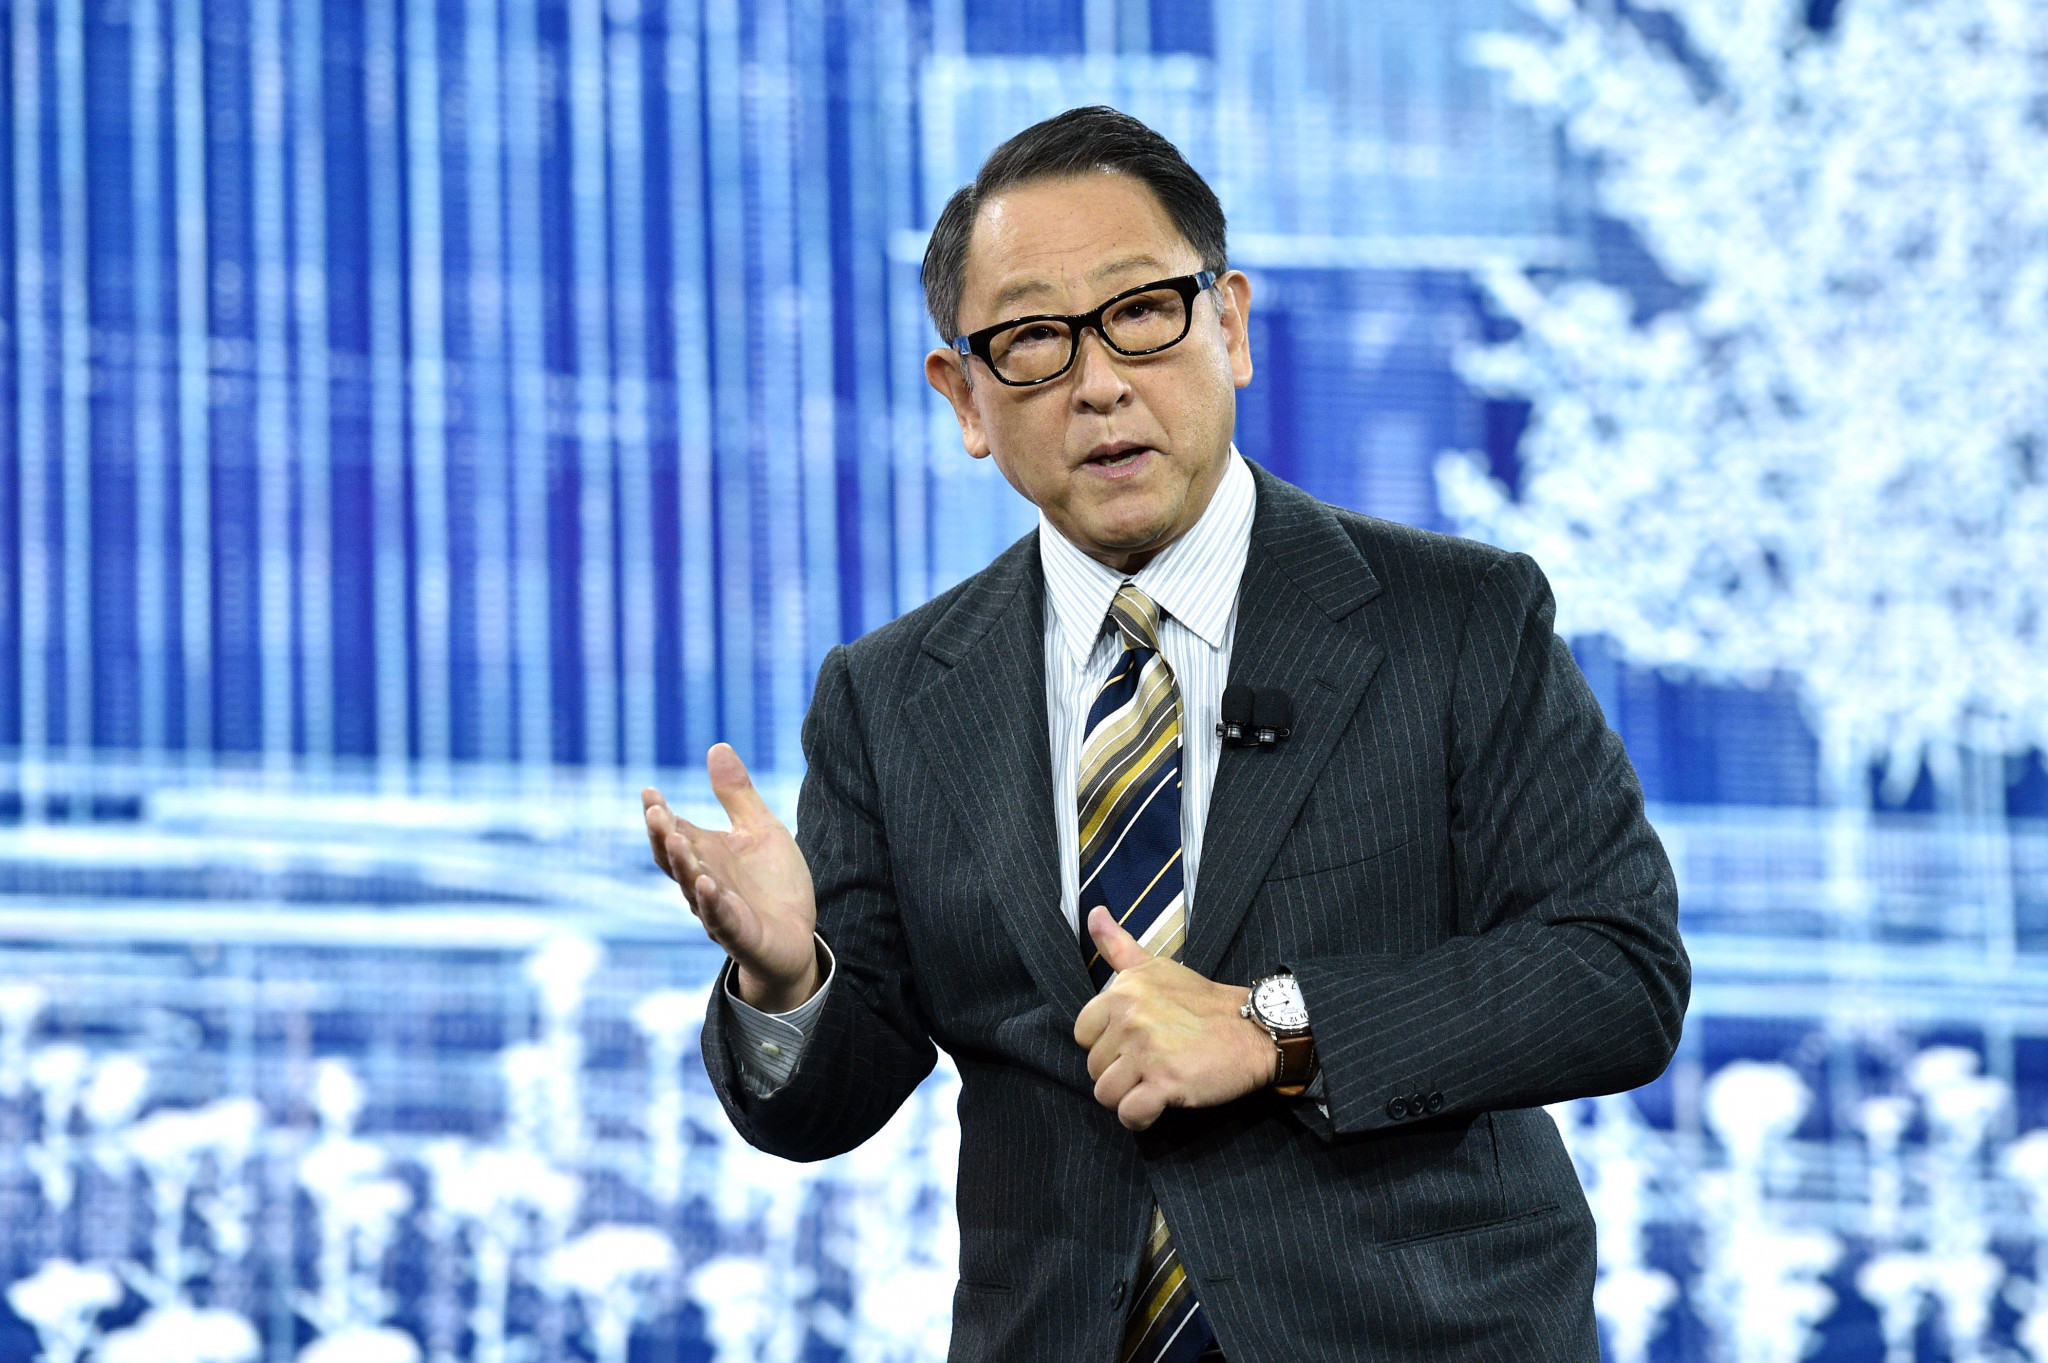 Toyota Motor Corp President Akio Toyoda has publicly criticised the comments made by Tokyo 2020 President Yoshirō Mori ©Getty Images